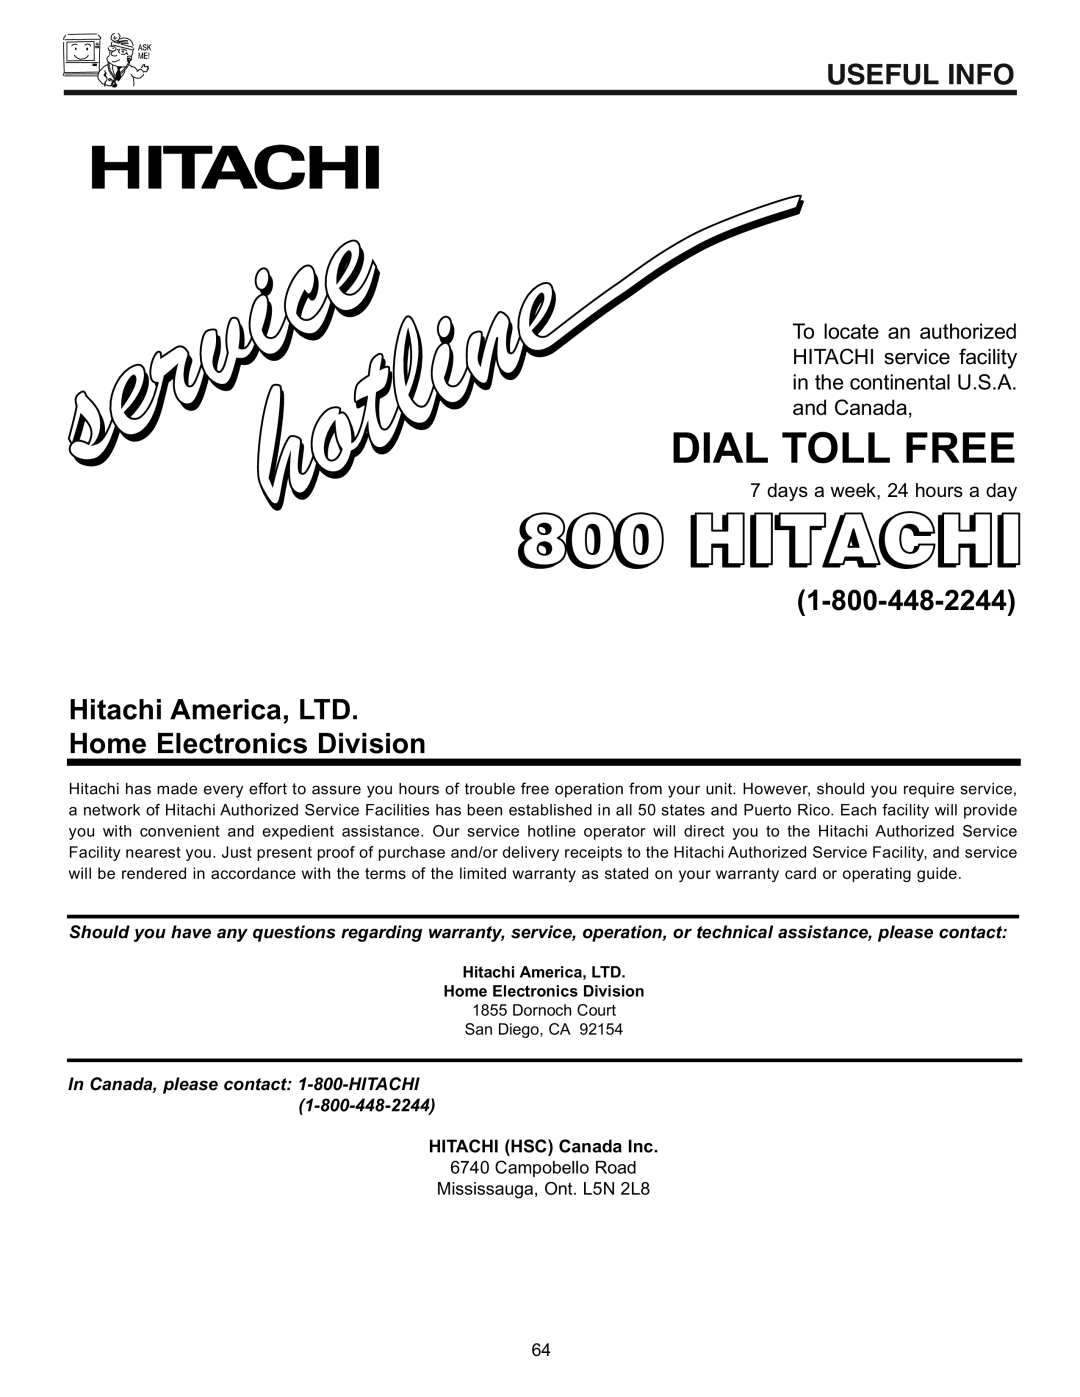 Hitachi 32UDX10S, 36UDX10S Home Electronics Division, Hitachi, Dial Toll Free, Useful Info, days a week, 24 hours a day 